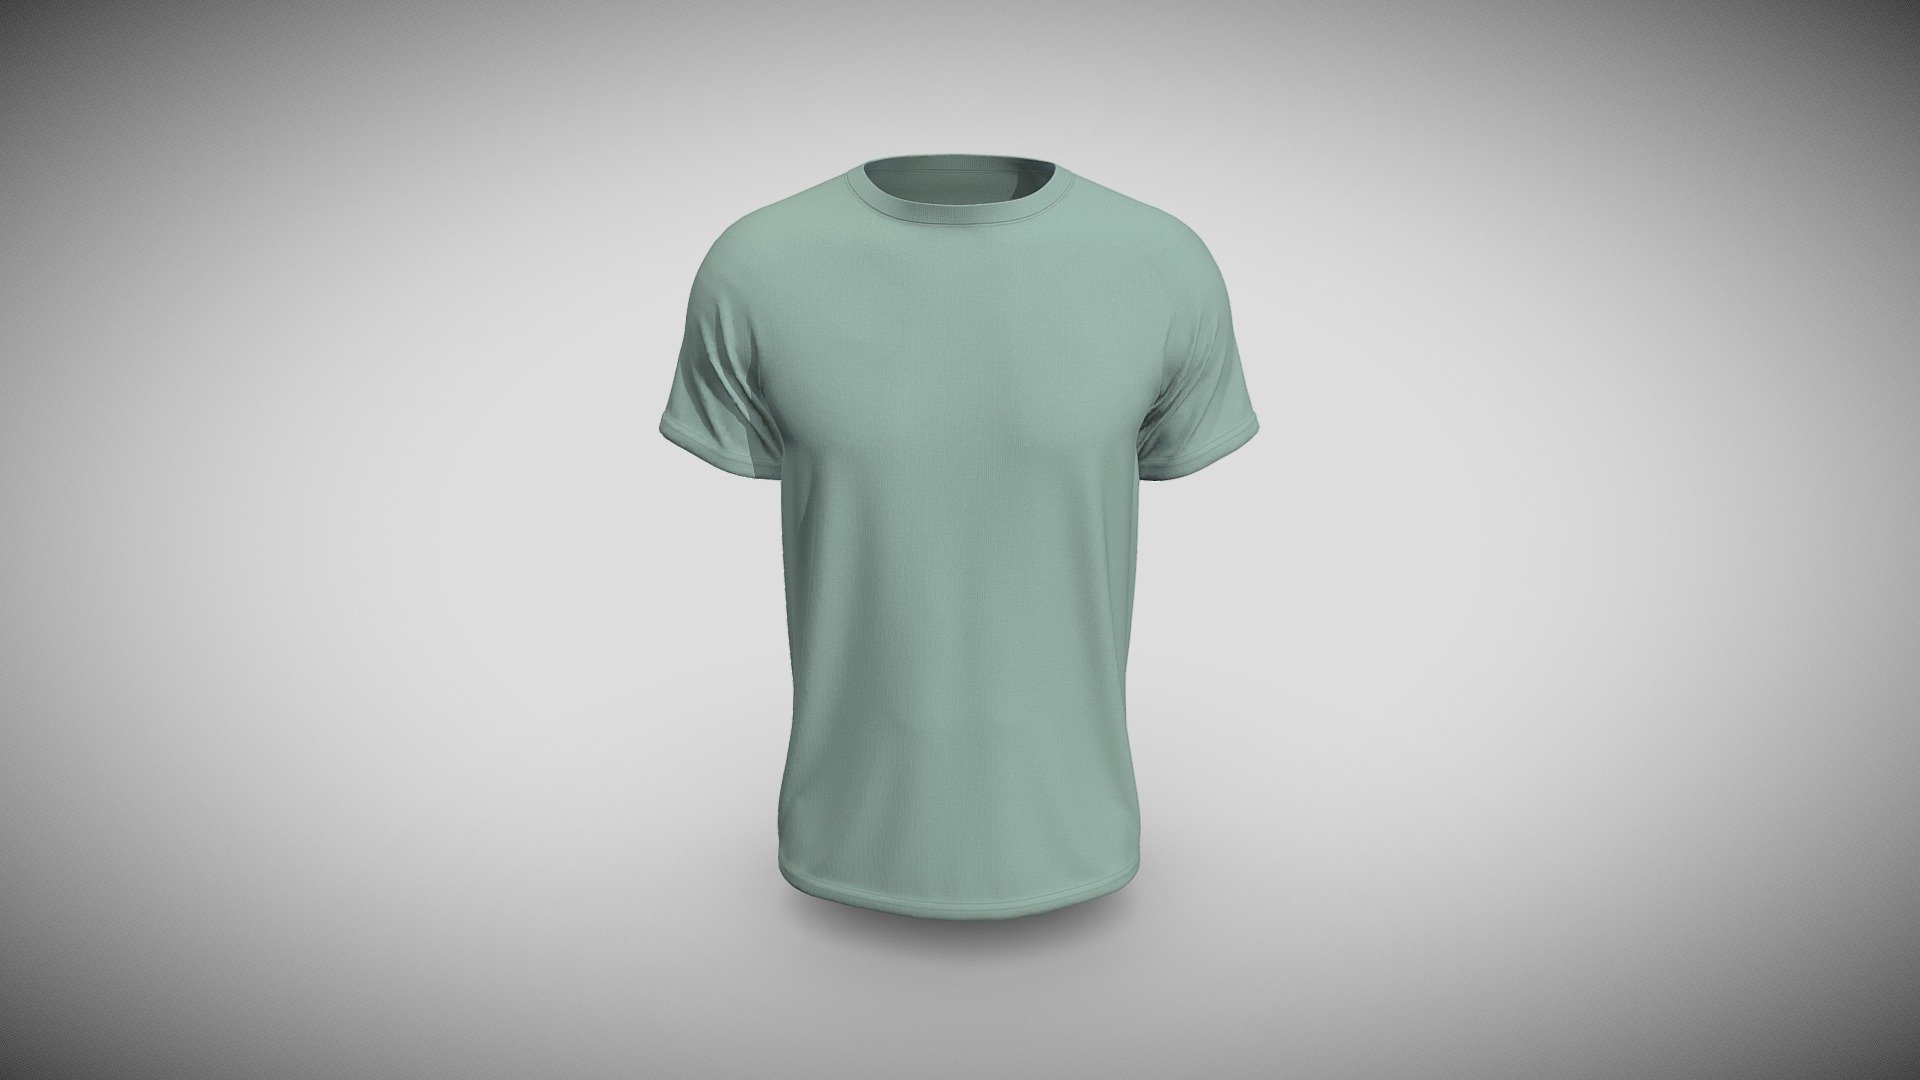 Cloth Title = Raglan Sleeve Round Neck Tee Design  

SKU = DG100142 

Category = Unisex 

Product Type = T-Shirt 

Cloth Length = Regular 

Body Fit = Regular Fit 

Occasion = Casual  

Sleeve Style = Raglan Sleeve 


Our Services:

3D Apparel Design.

OBJ,FBX,GLTF Making with High/Low Poly.

Fabric Digitalization.

Mockup making.

3D Teck Pack.

Pattern Making.

2D Illustration.

Cloth Animation and 360 Spin Video.


Contact us:- 

Email: info@digitalfashionwear.com 

Website: https://digitalfashionwear.com 


We designed all the types of cloth specially focused on product visualization, e-commerce, fitting, and production. 

We will design: 

T-shirts 

Polo shirts 

Hoodies 

Sweatshirt 

Jackets 

Shirts 

TankTops 

Trousers 

Bras 

Underwear 

Blazer 

Aprons 

Leggings 

and All Fashion items. 





Our goal is to make sure what we provide you, meets your demand 3d model